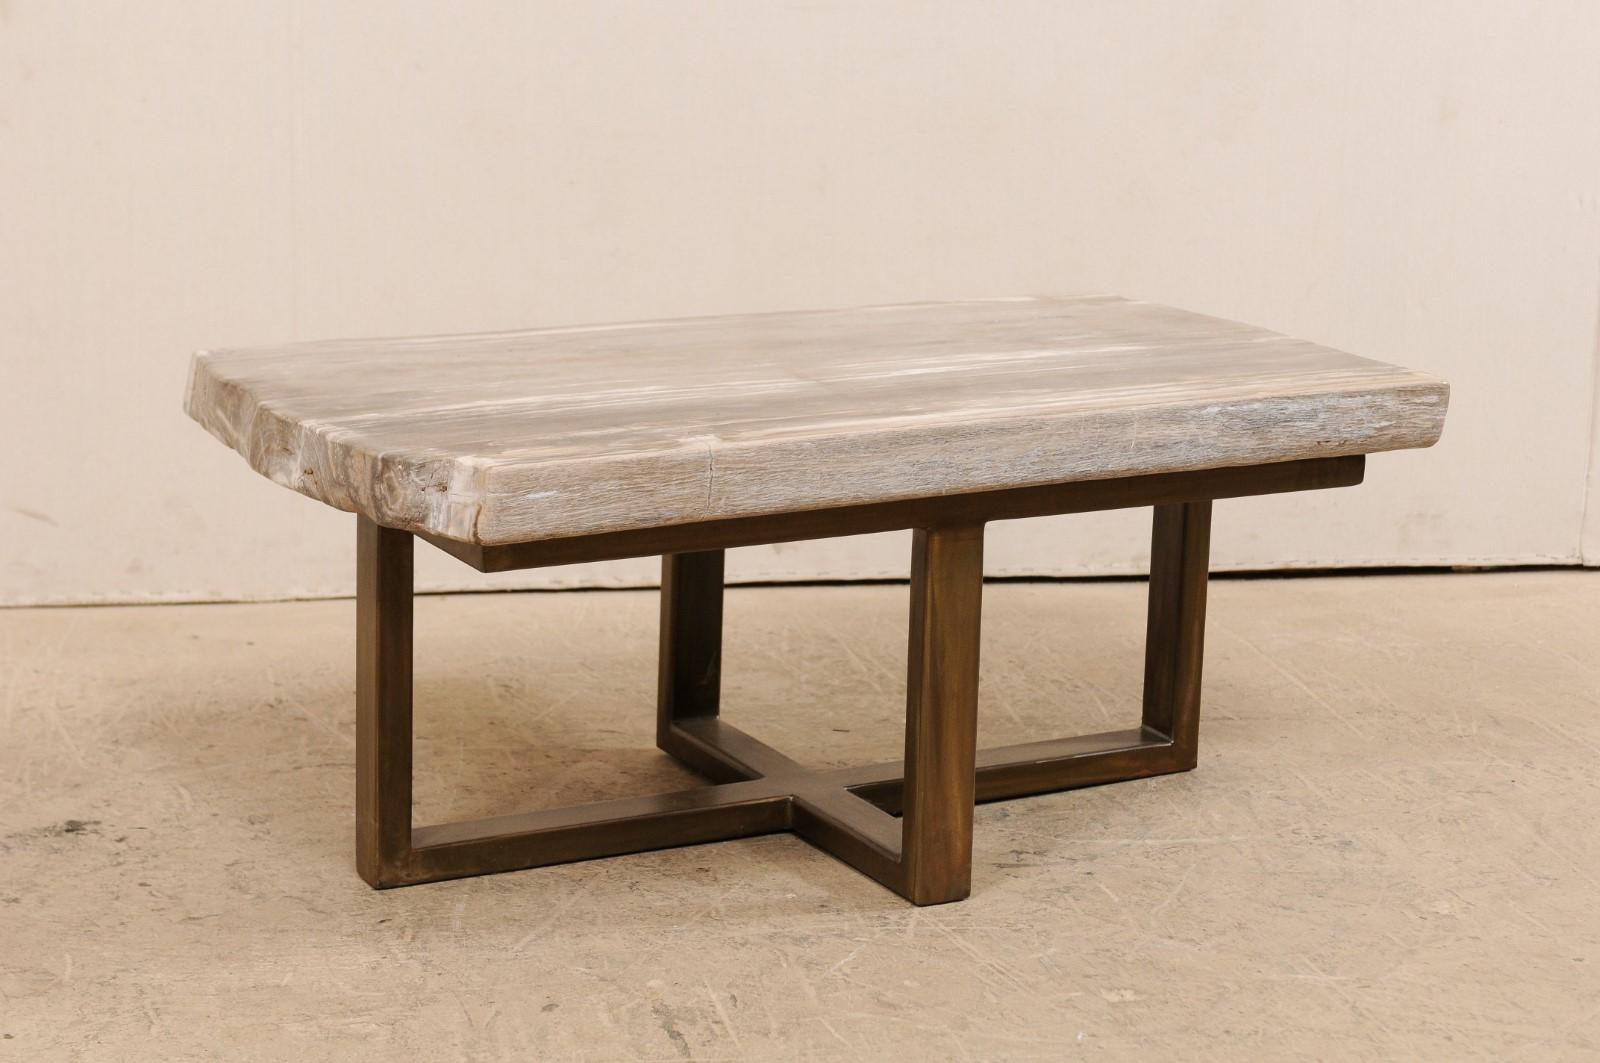 A petrified wood top modernly designed coffee table (could also function as a bench). This custom coffee table has been fashioned from a gorgeous single thick slab of smoothly polished petrified wood, with an overall rectangular-shape, approximately